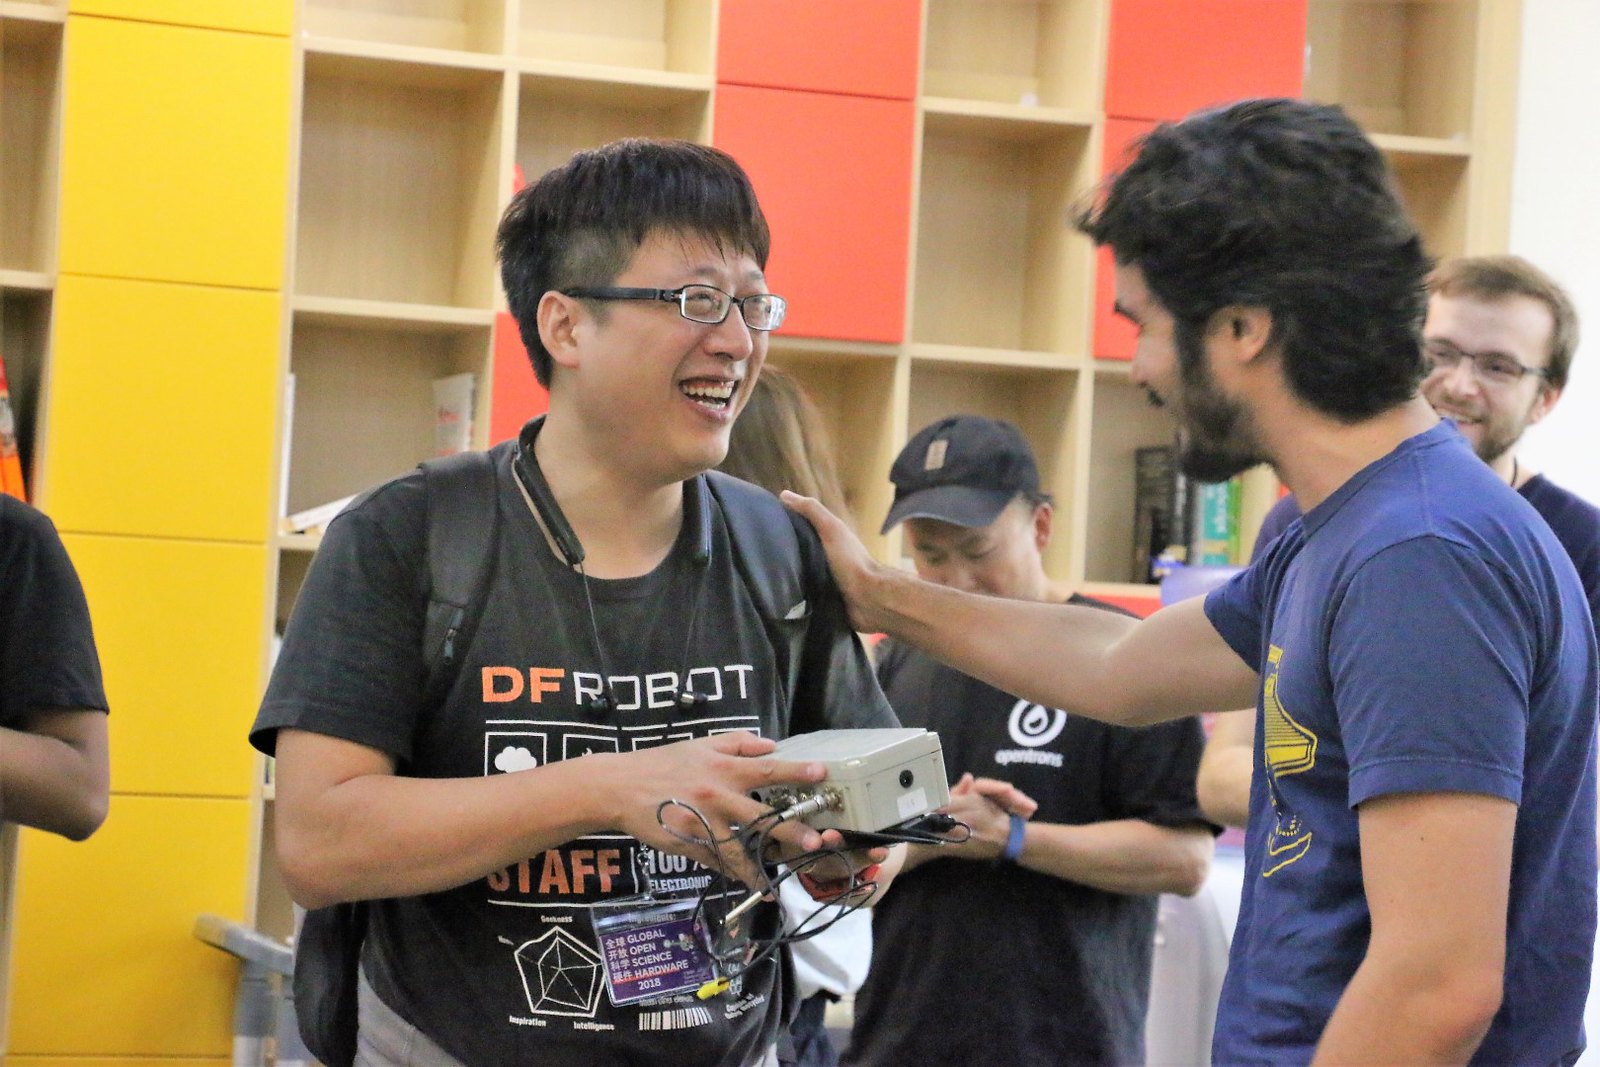 Photo of attendees sharing hardware equipment and smiling